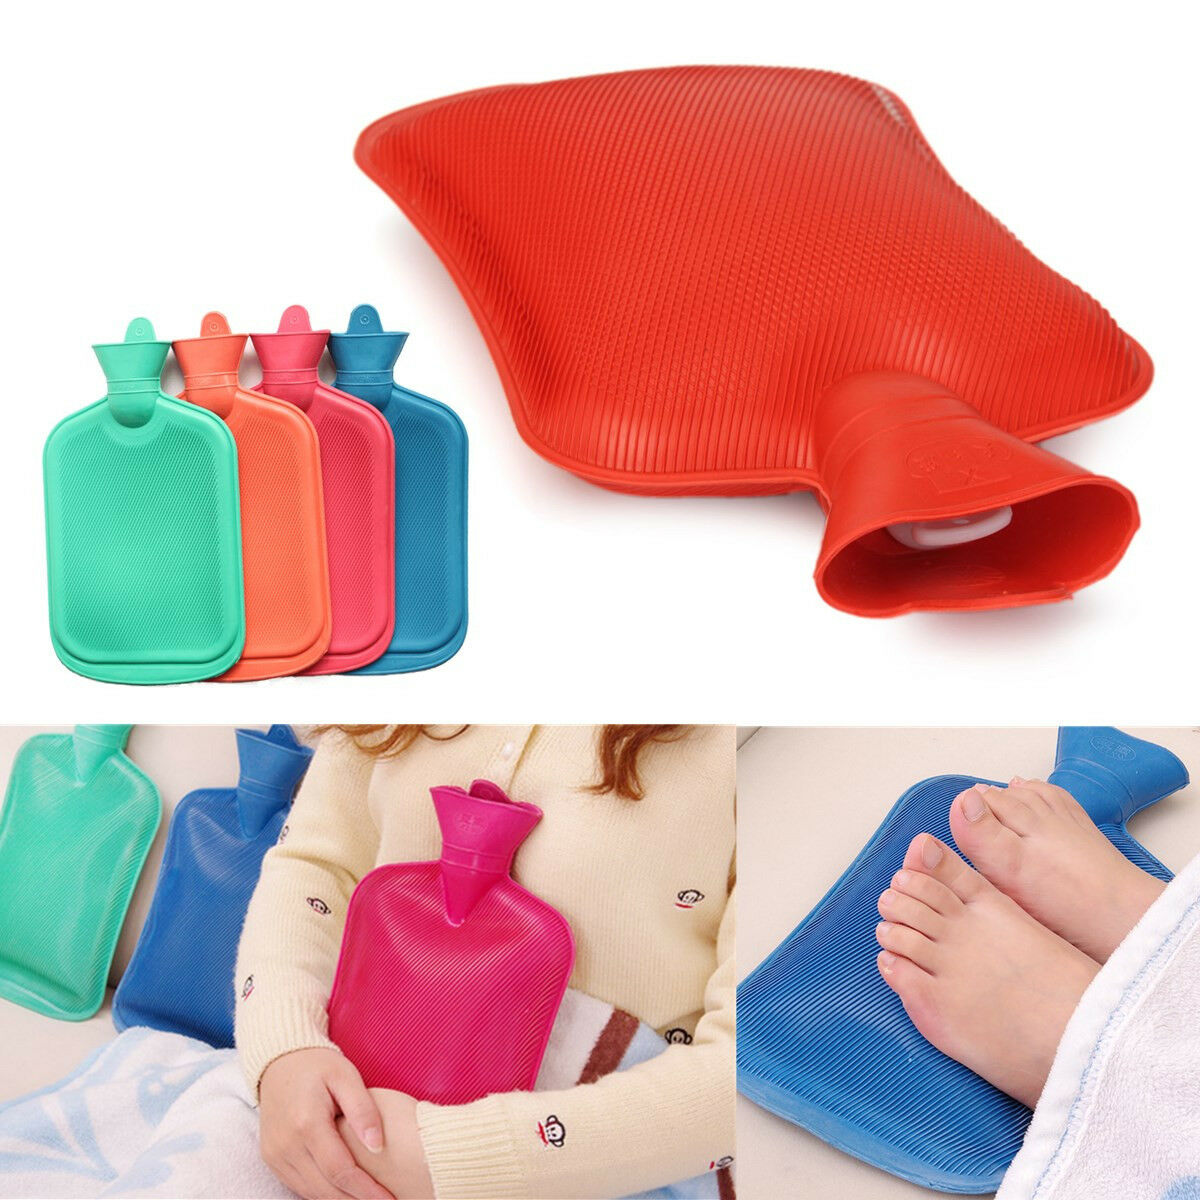 Rubber Hot Water Bottle Bag Warm Relaxing Heat / Cold Therapy 670 Ml ~ 1800 Ml